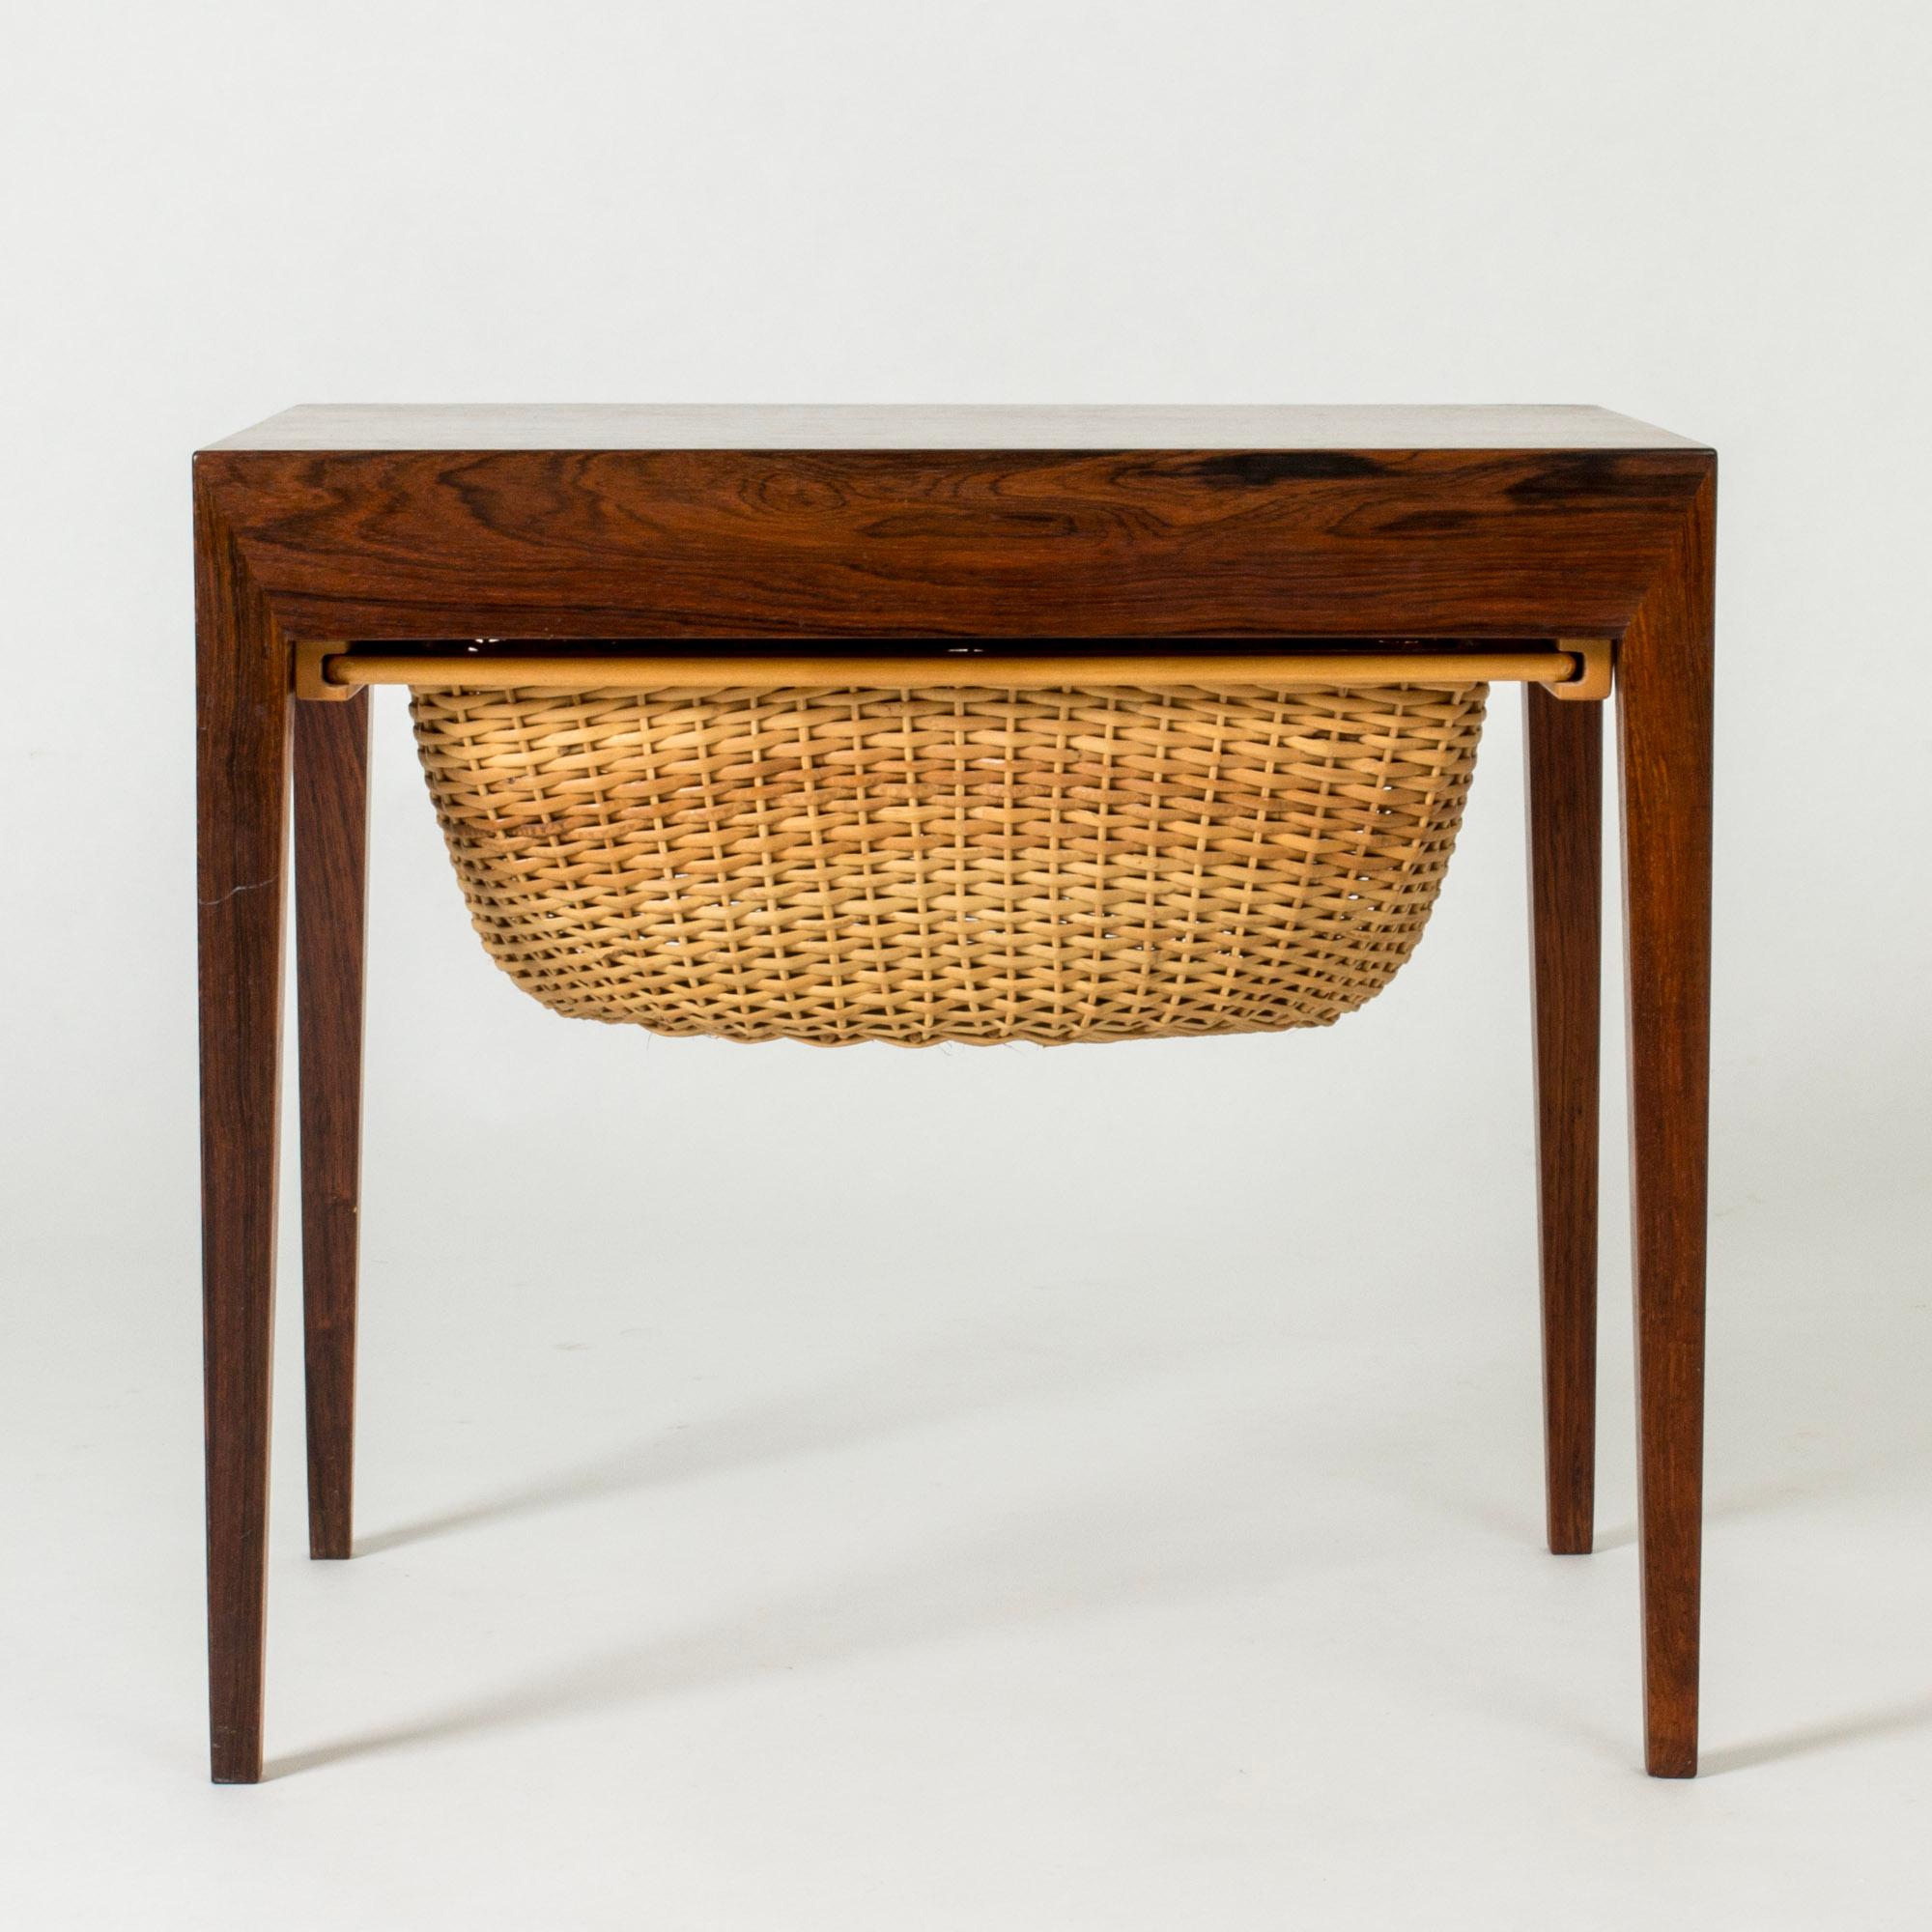 Lovely rosewood side table by Severin Hansen with a wicker basket drawer. Great for storage and creating a great silhouette. Severin Hansen’s characteristic diagonal, seamless joinery at the corners.